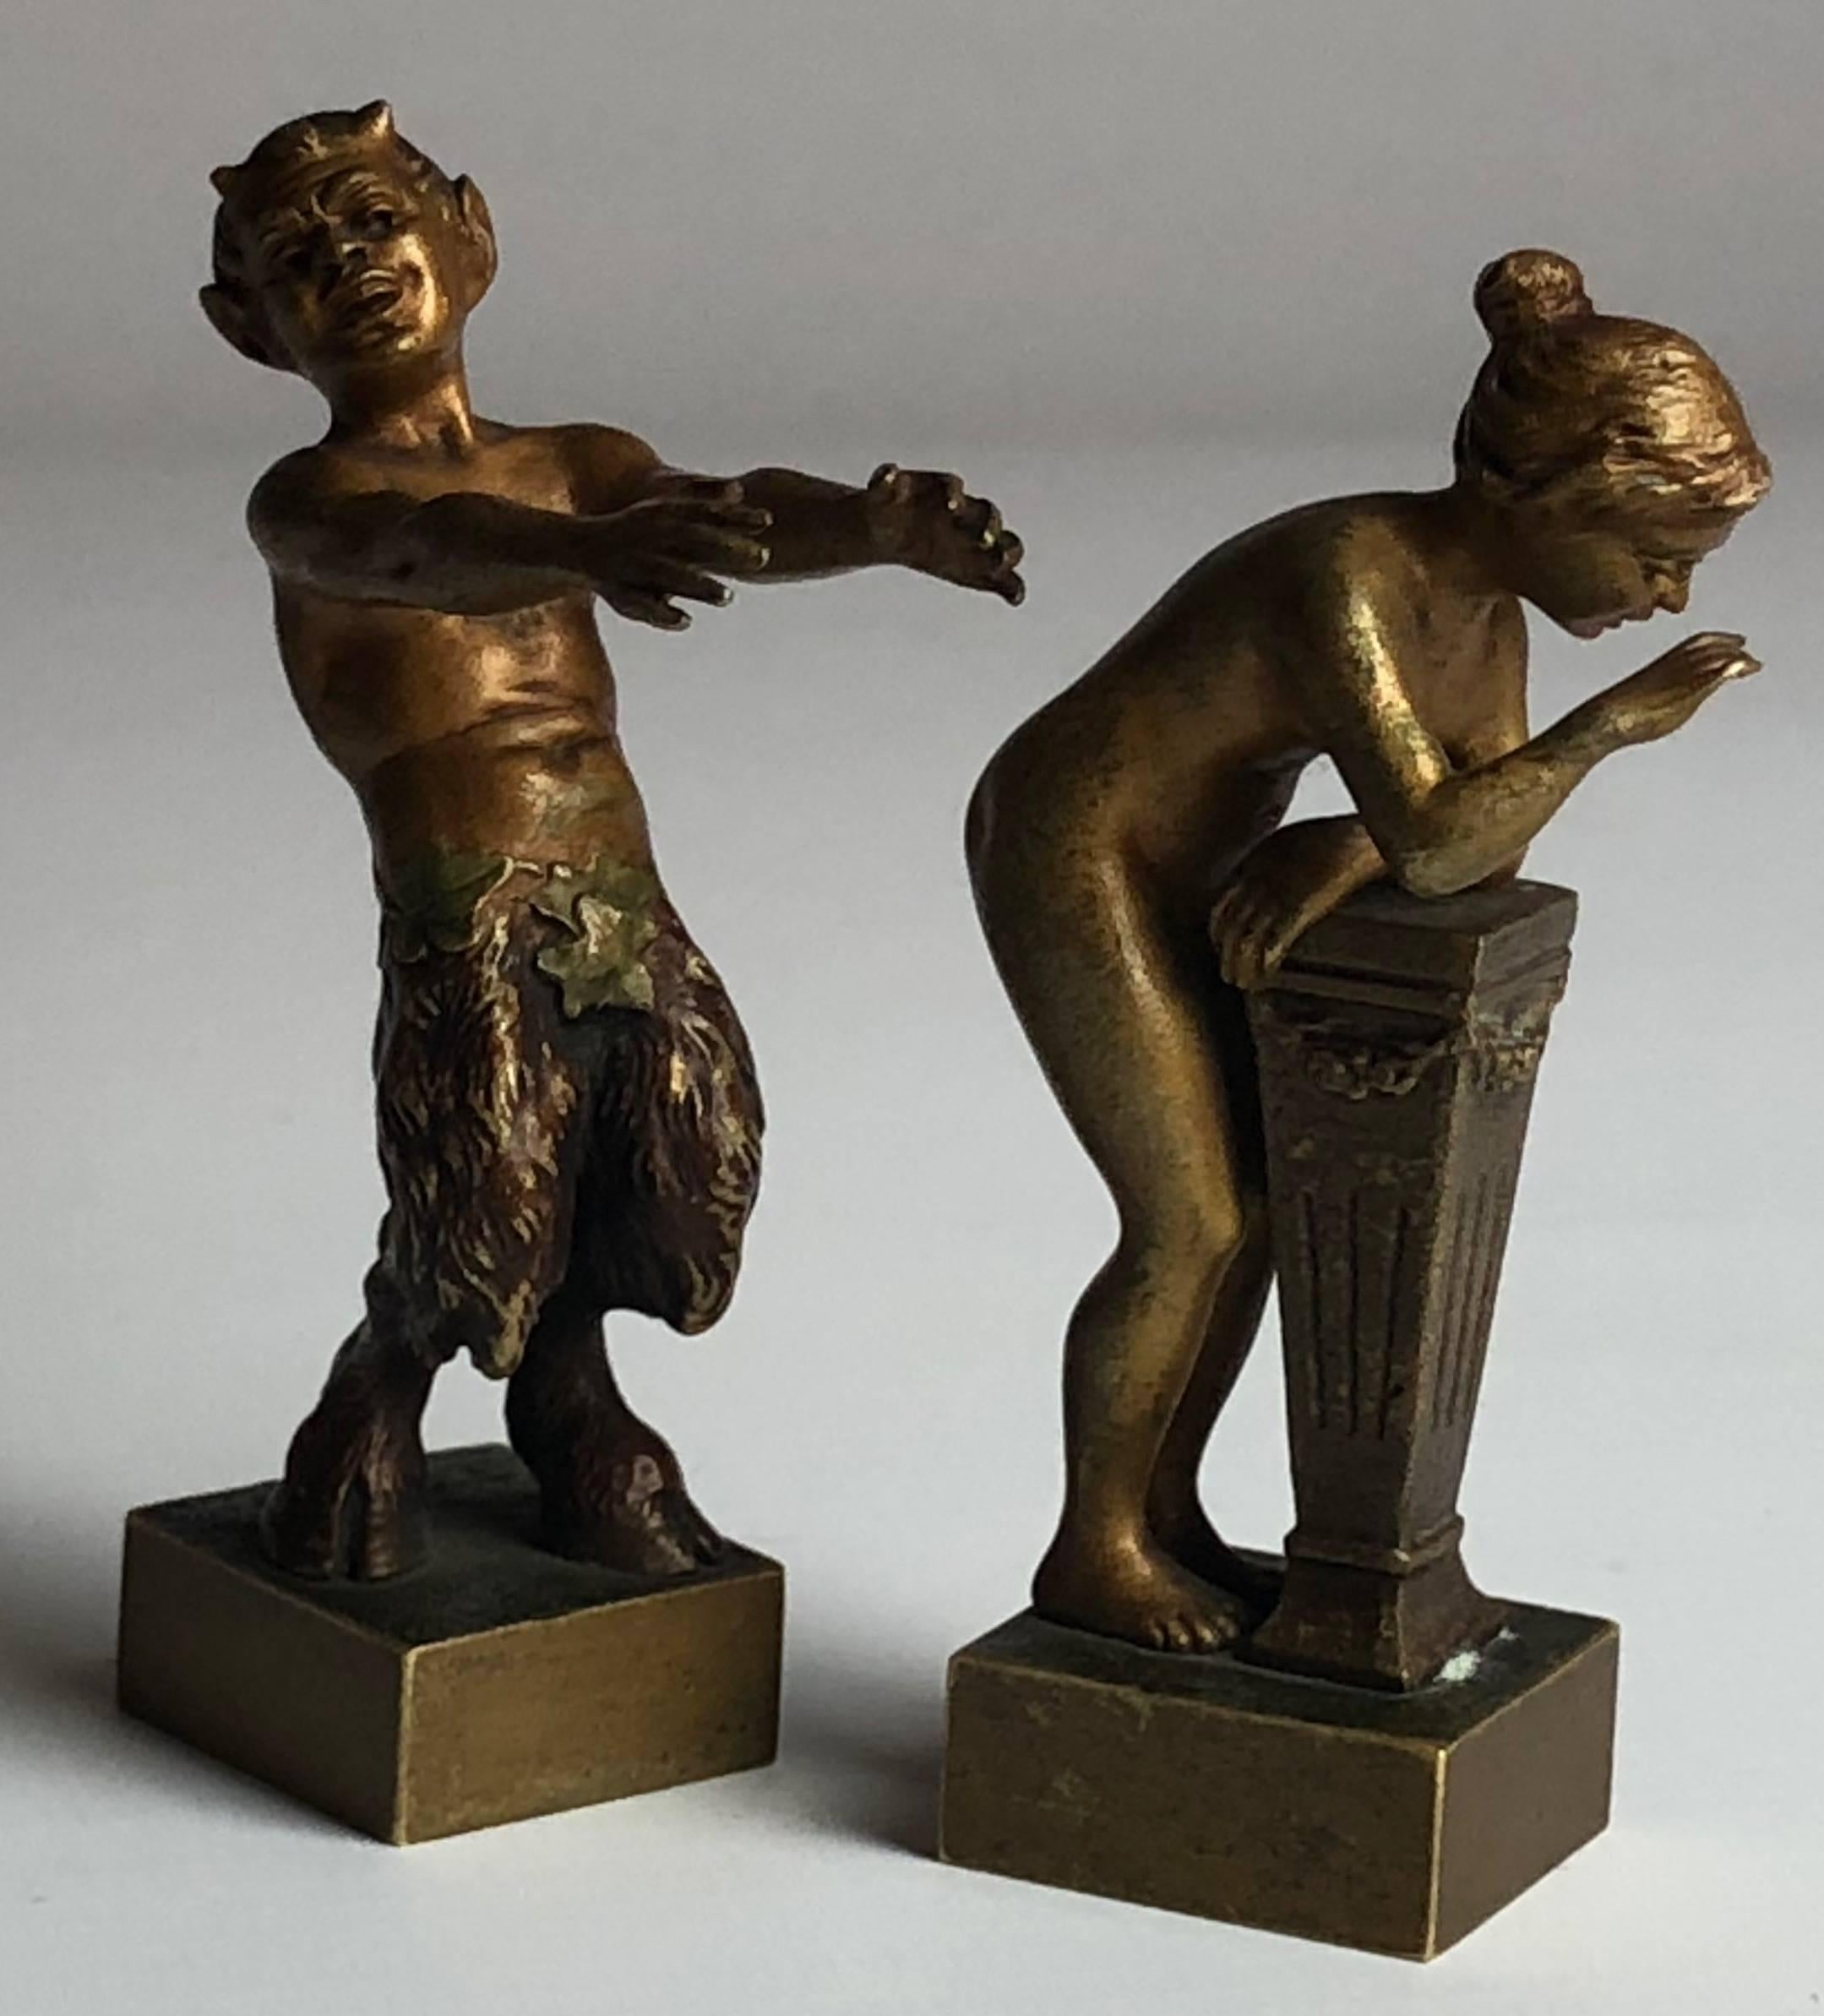 An amusing pair of erotic Vienna bronzes, the nymph and the satyr by Bergman.

Both marked B in the base. 
Cold painted bronze.
Austria

The pair stand 3